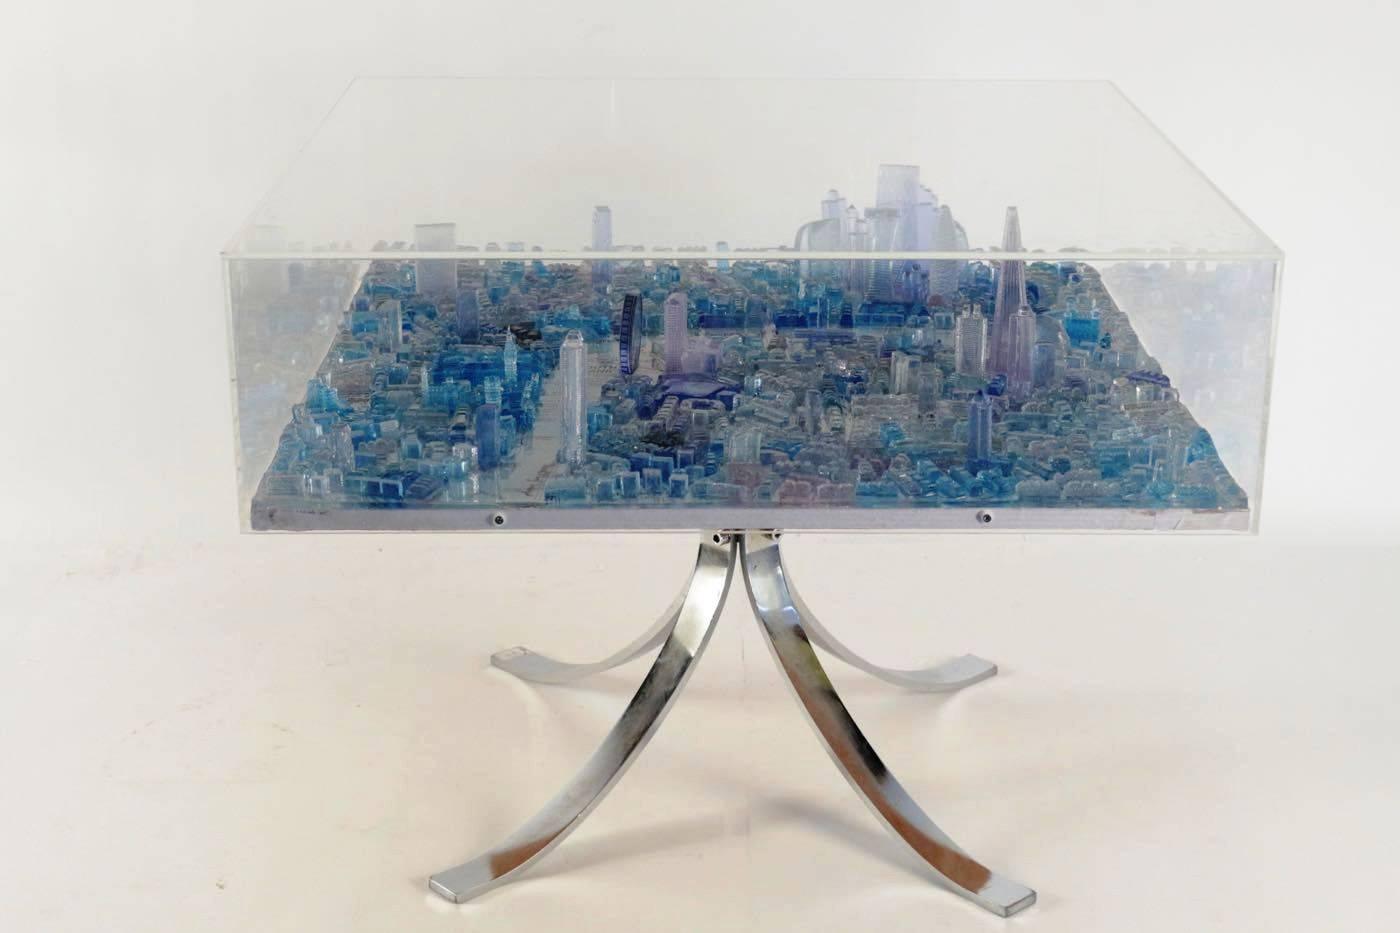 Fabulous coffee or side table by Grigoris Lagos, molded resin, 2015, unique piece
with 1970s table base
from the cityscapes series.